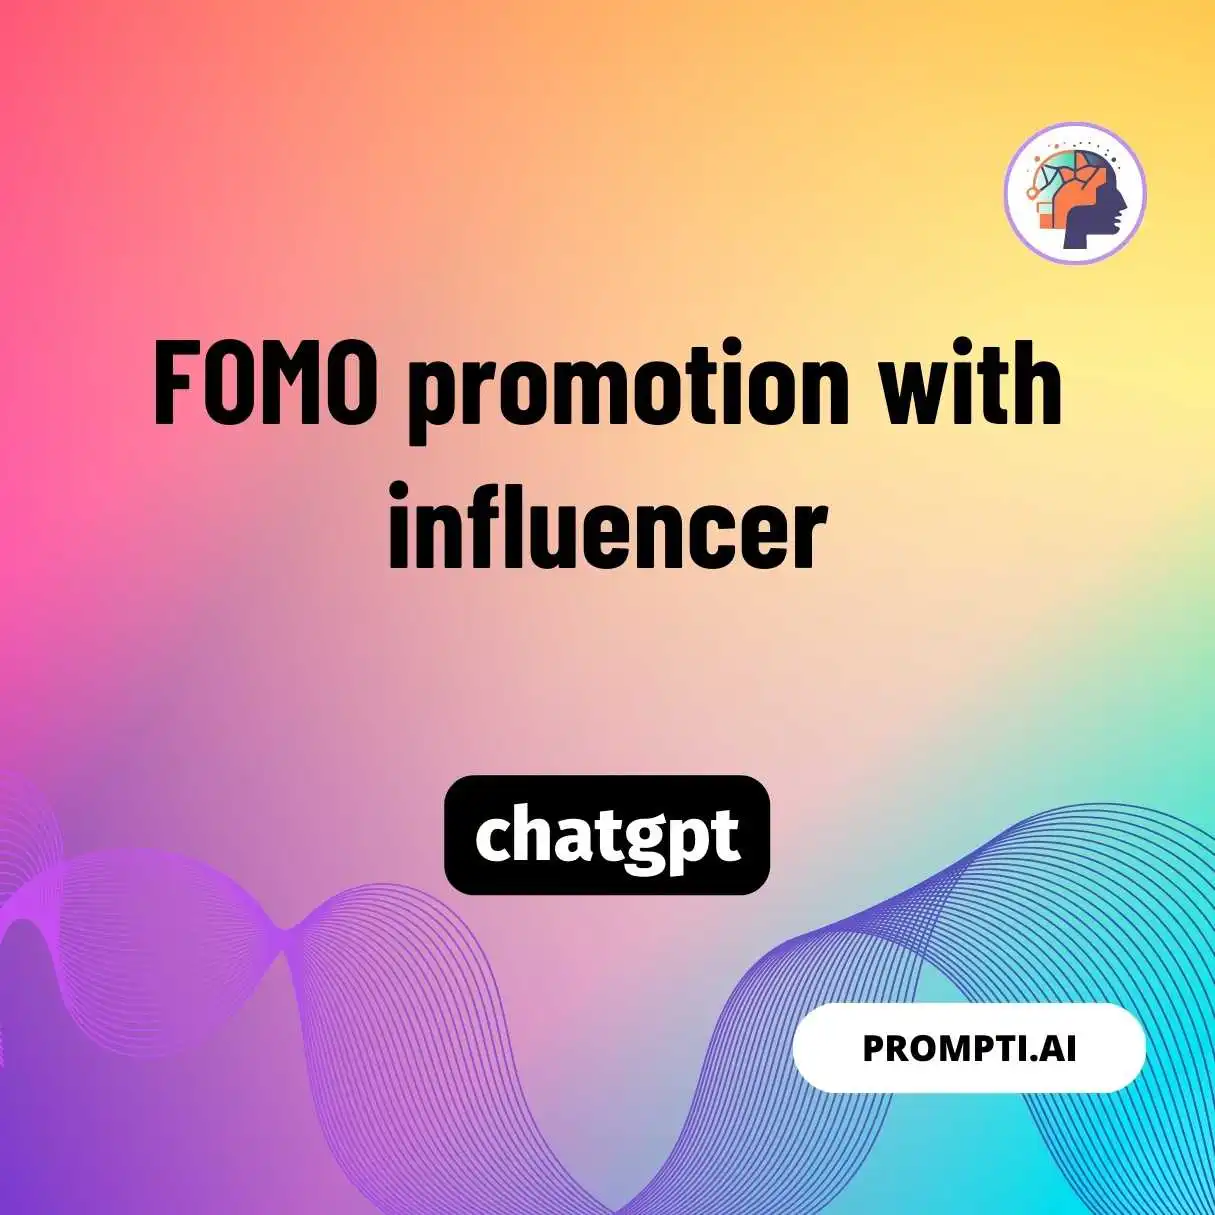 FOMO promotion with influencer